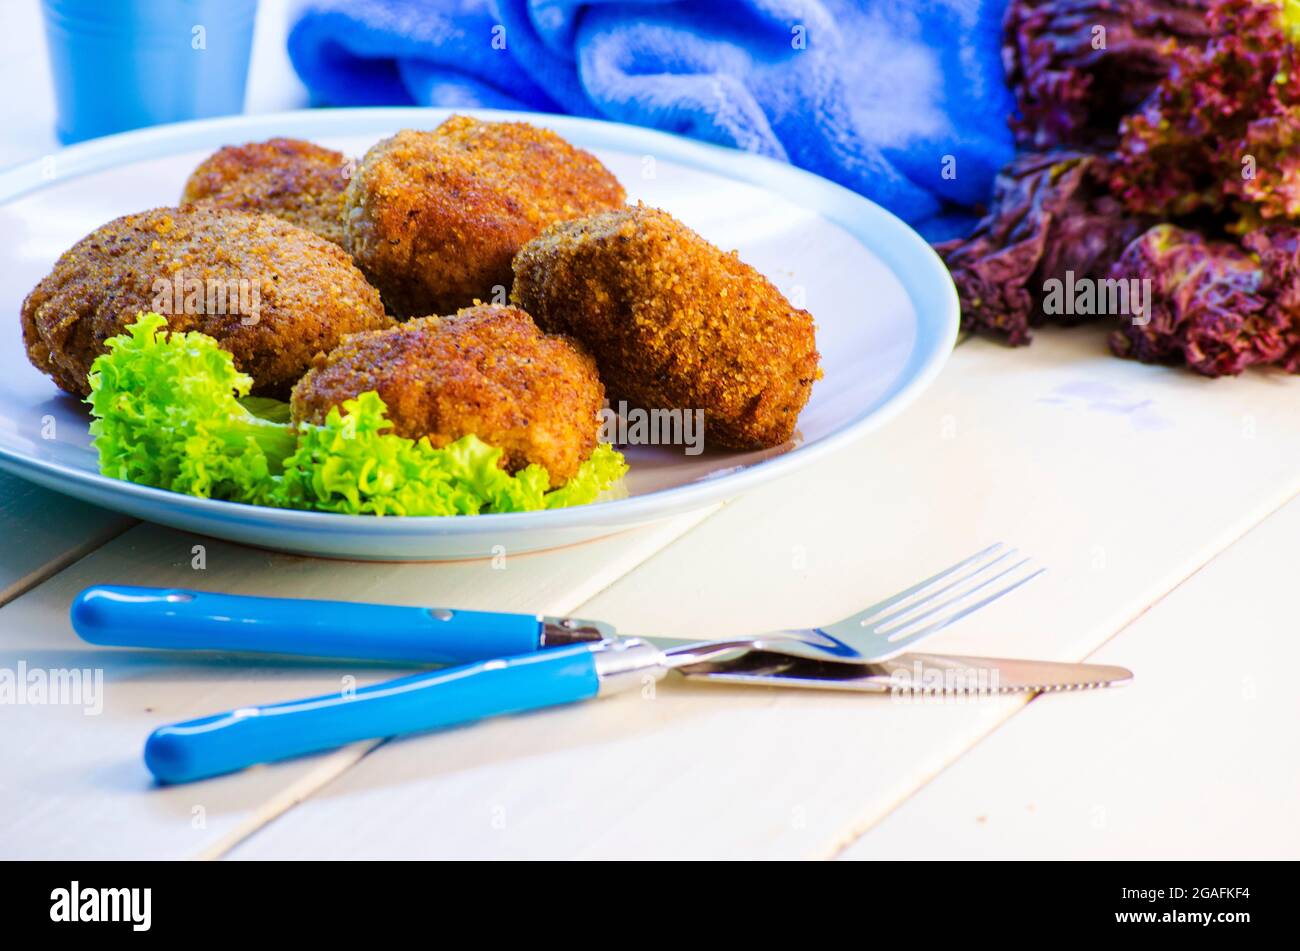 fried meat patties on a plate close-up Stock Photo